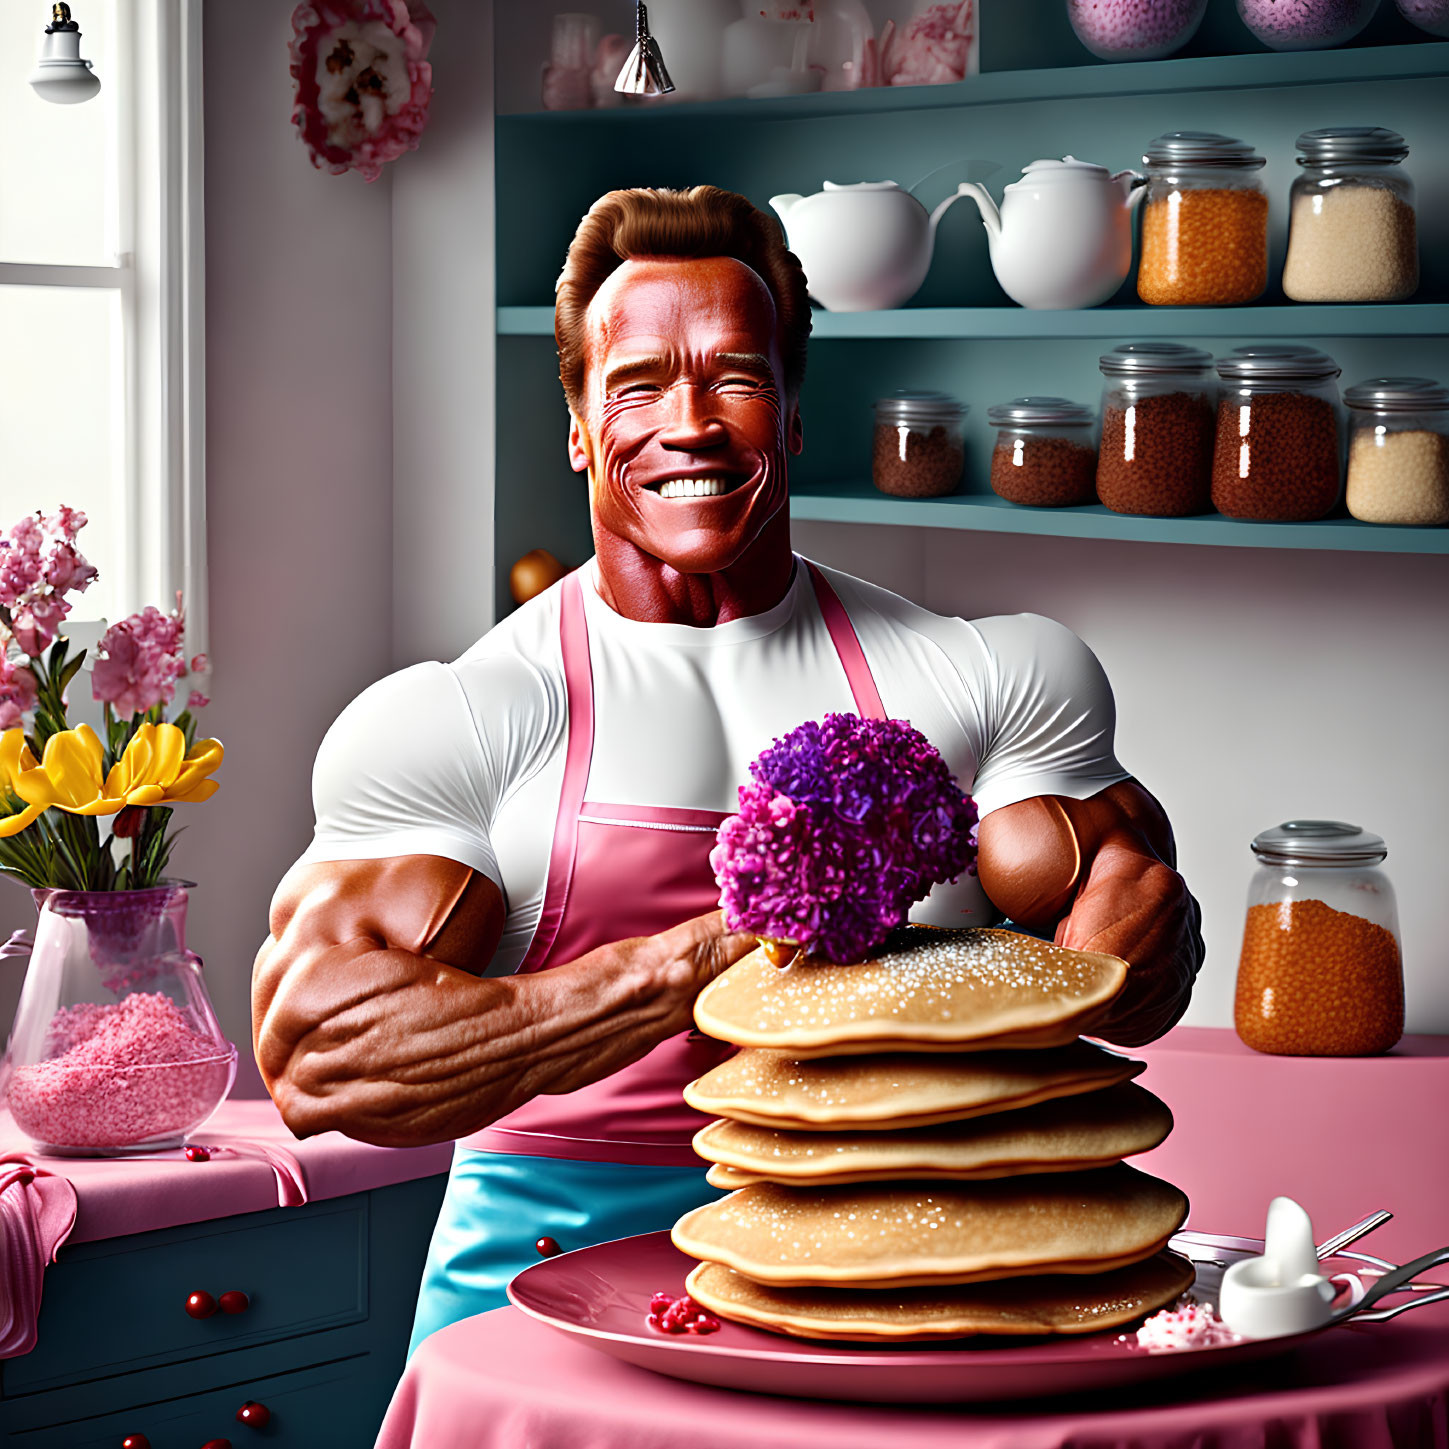 Muscular Man Smiling in Apron with Pancakes and Ingredients at Kitchen Table